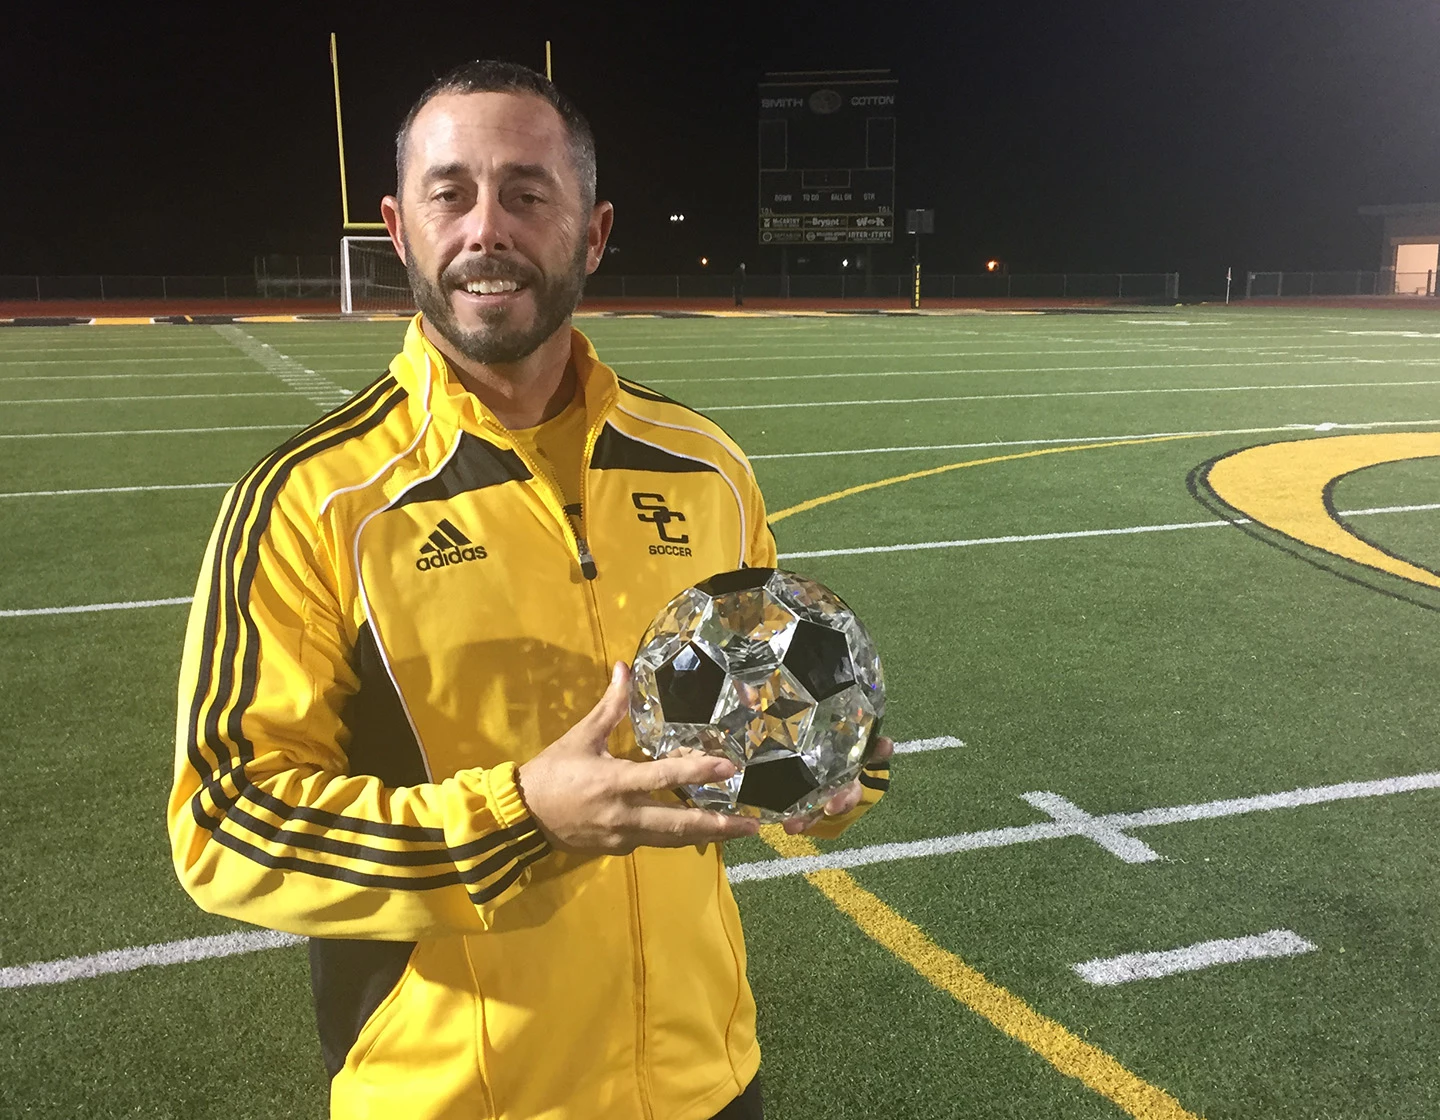 S-C's Weller Sets School Win Record with Tigers' Soccer